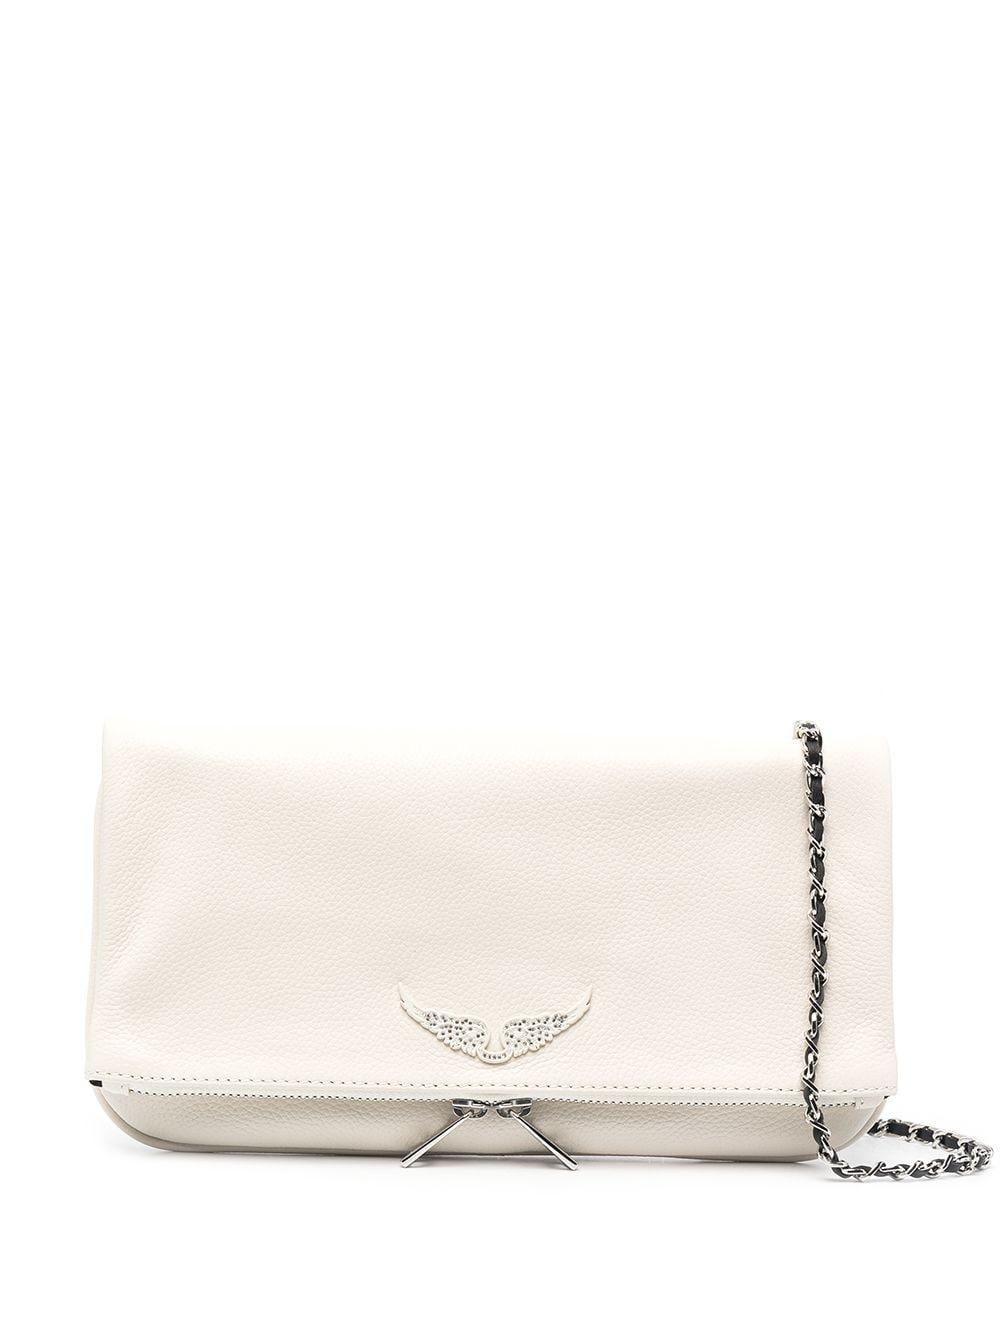 Zadig & Voltaire Rock Leather Clutch Bag in White | Lyst